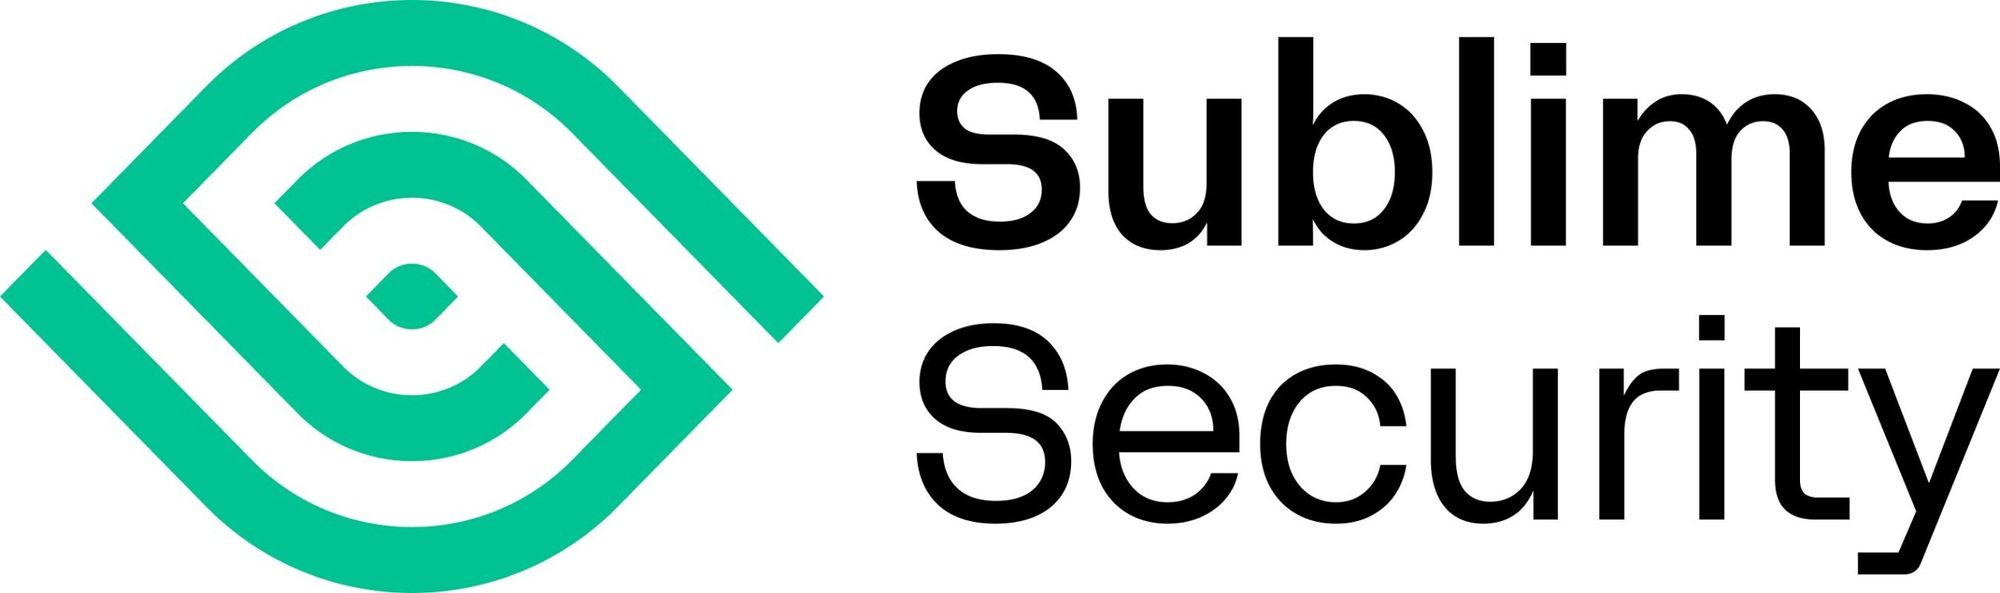 Sublime Security lands $20M Series A for expansion